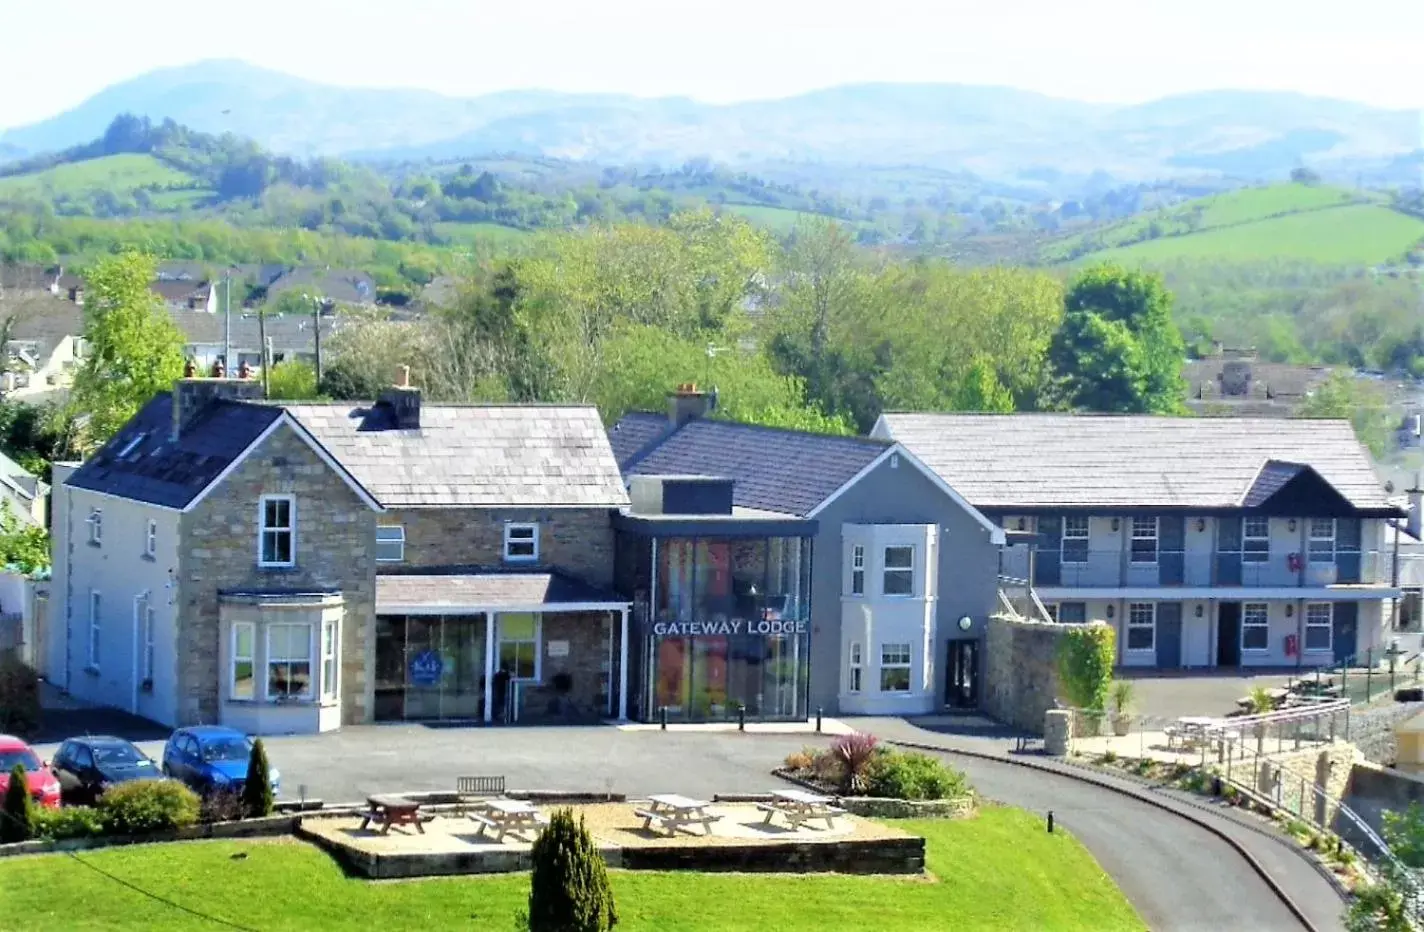 Bird's eye view, Property Building in The Gateway Lodge